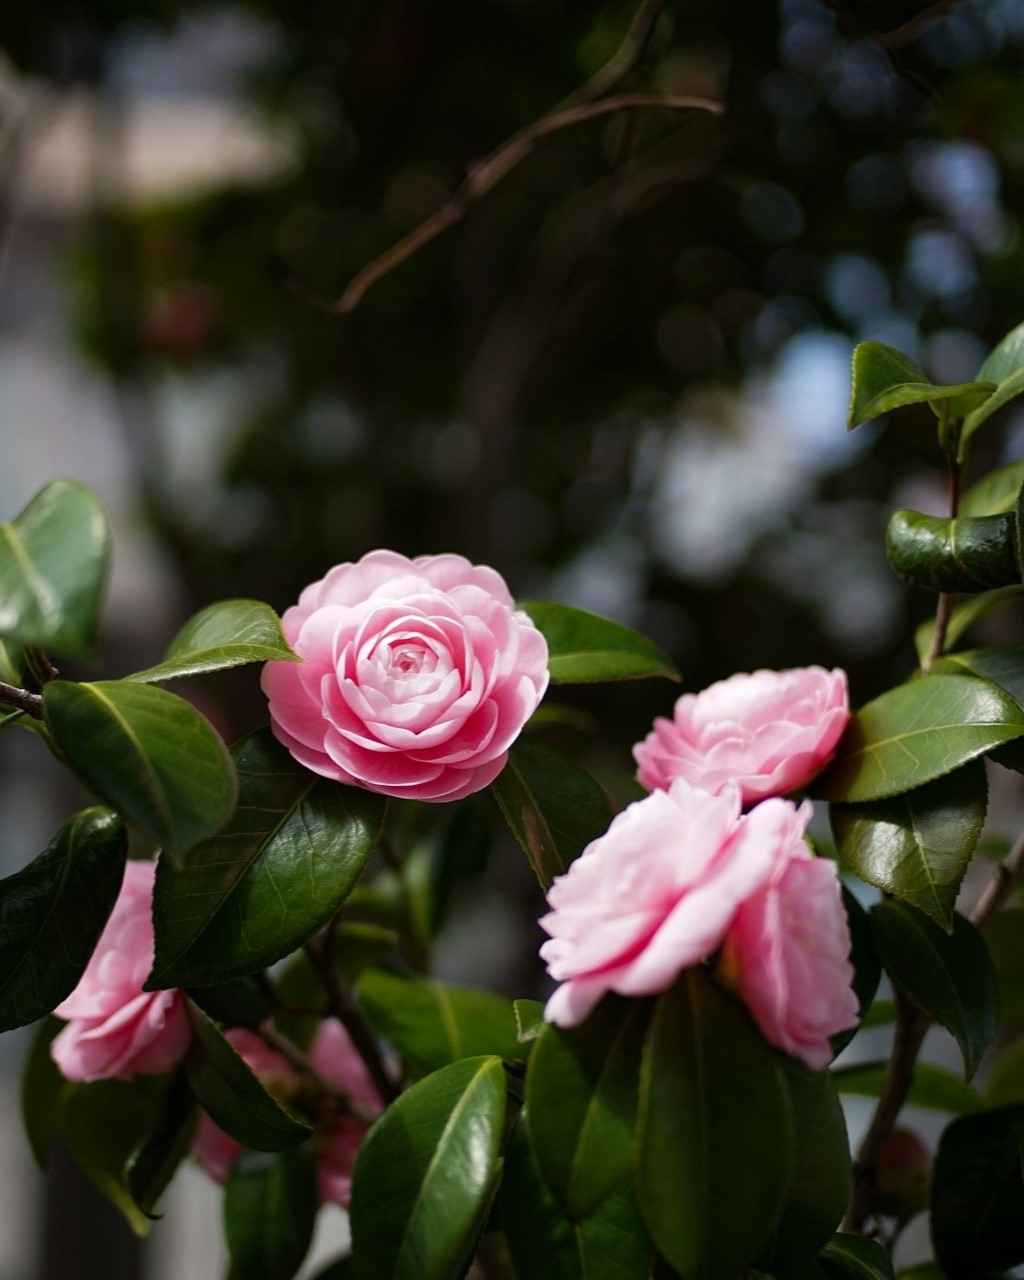 Six Camellia japonica blooms with dark green leaves in the background